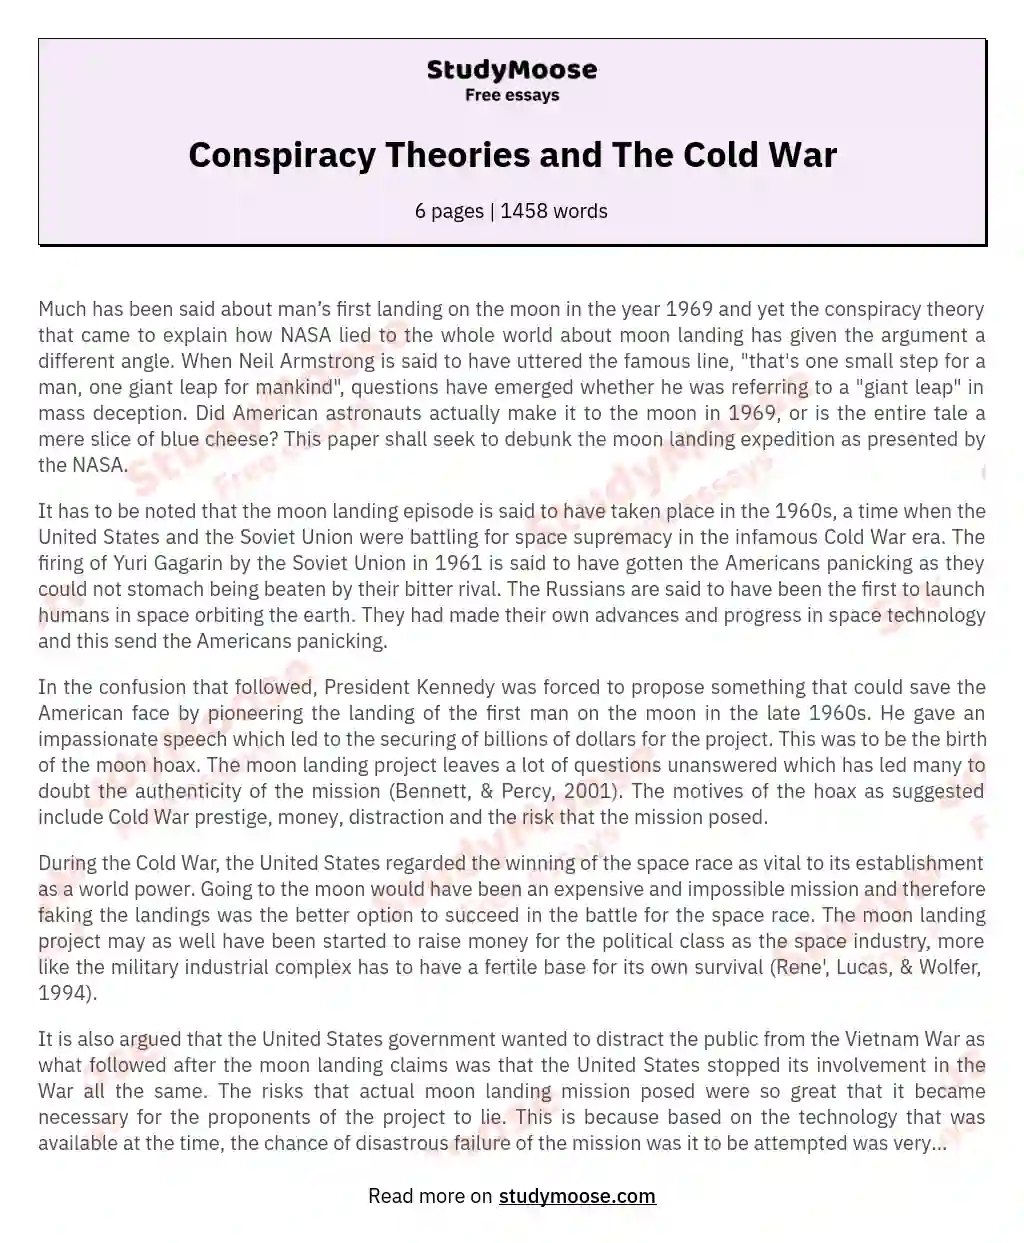 Conspiracy Theories and The Cold War essay